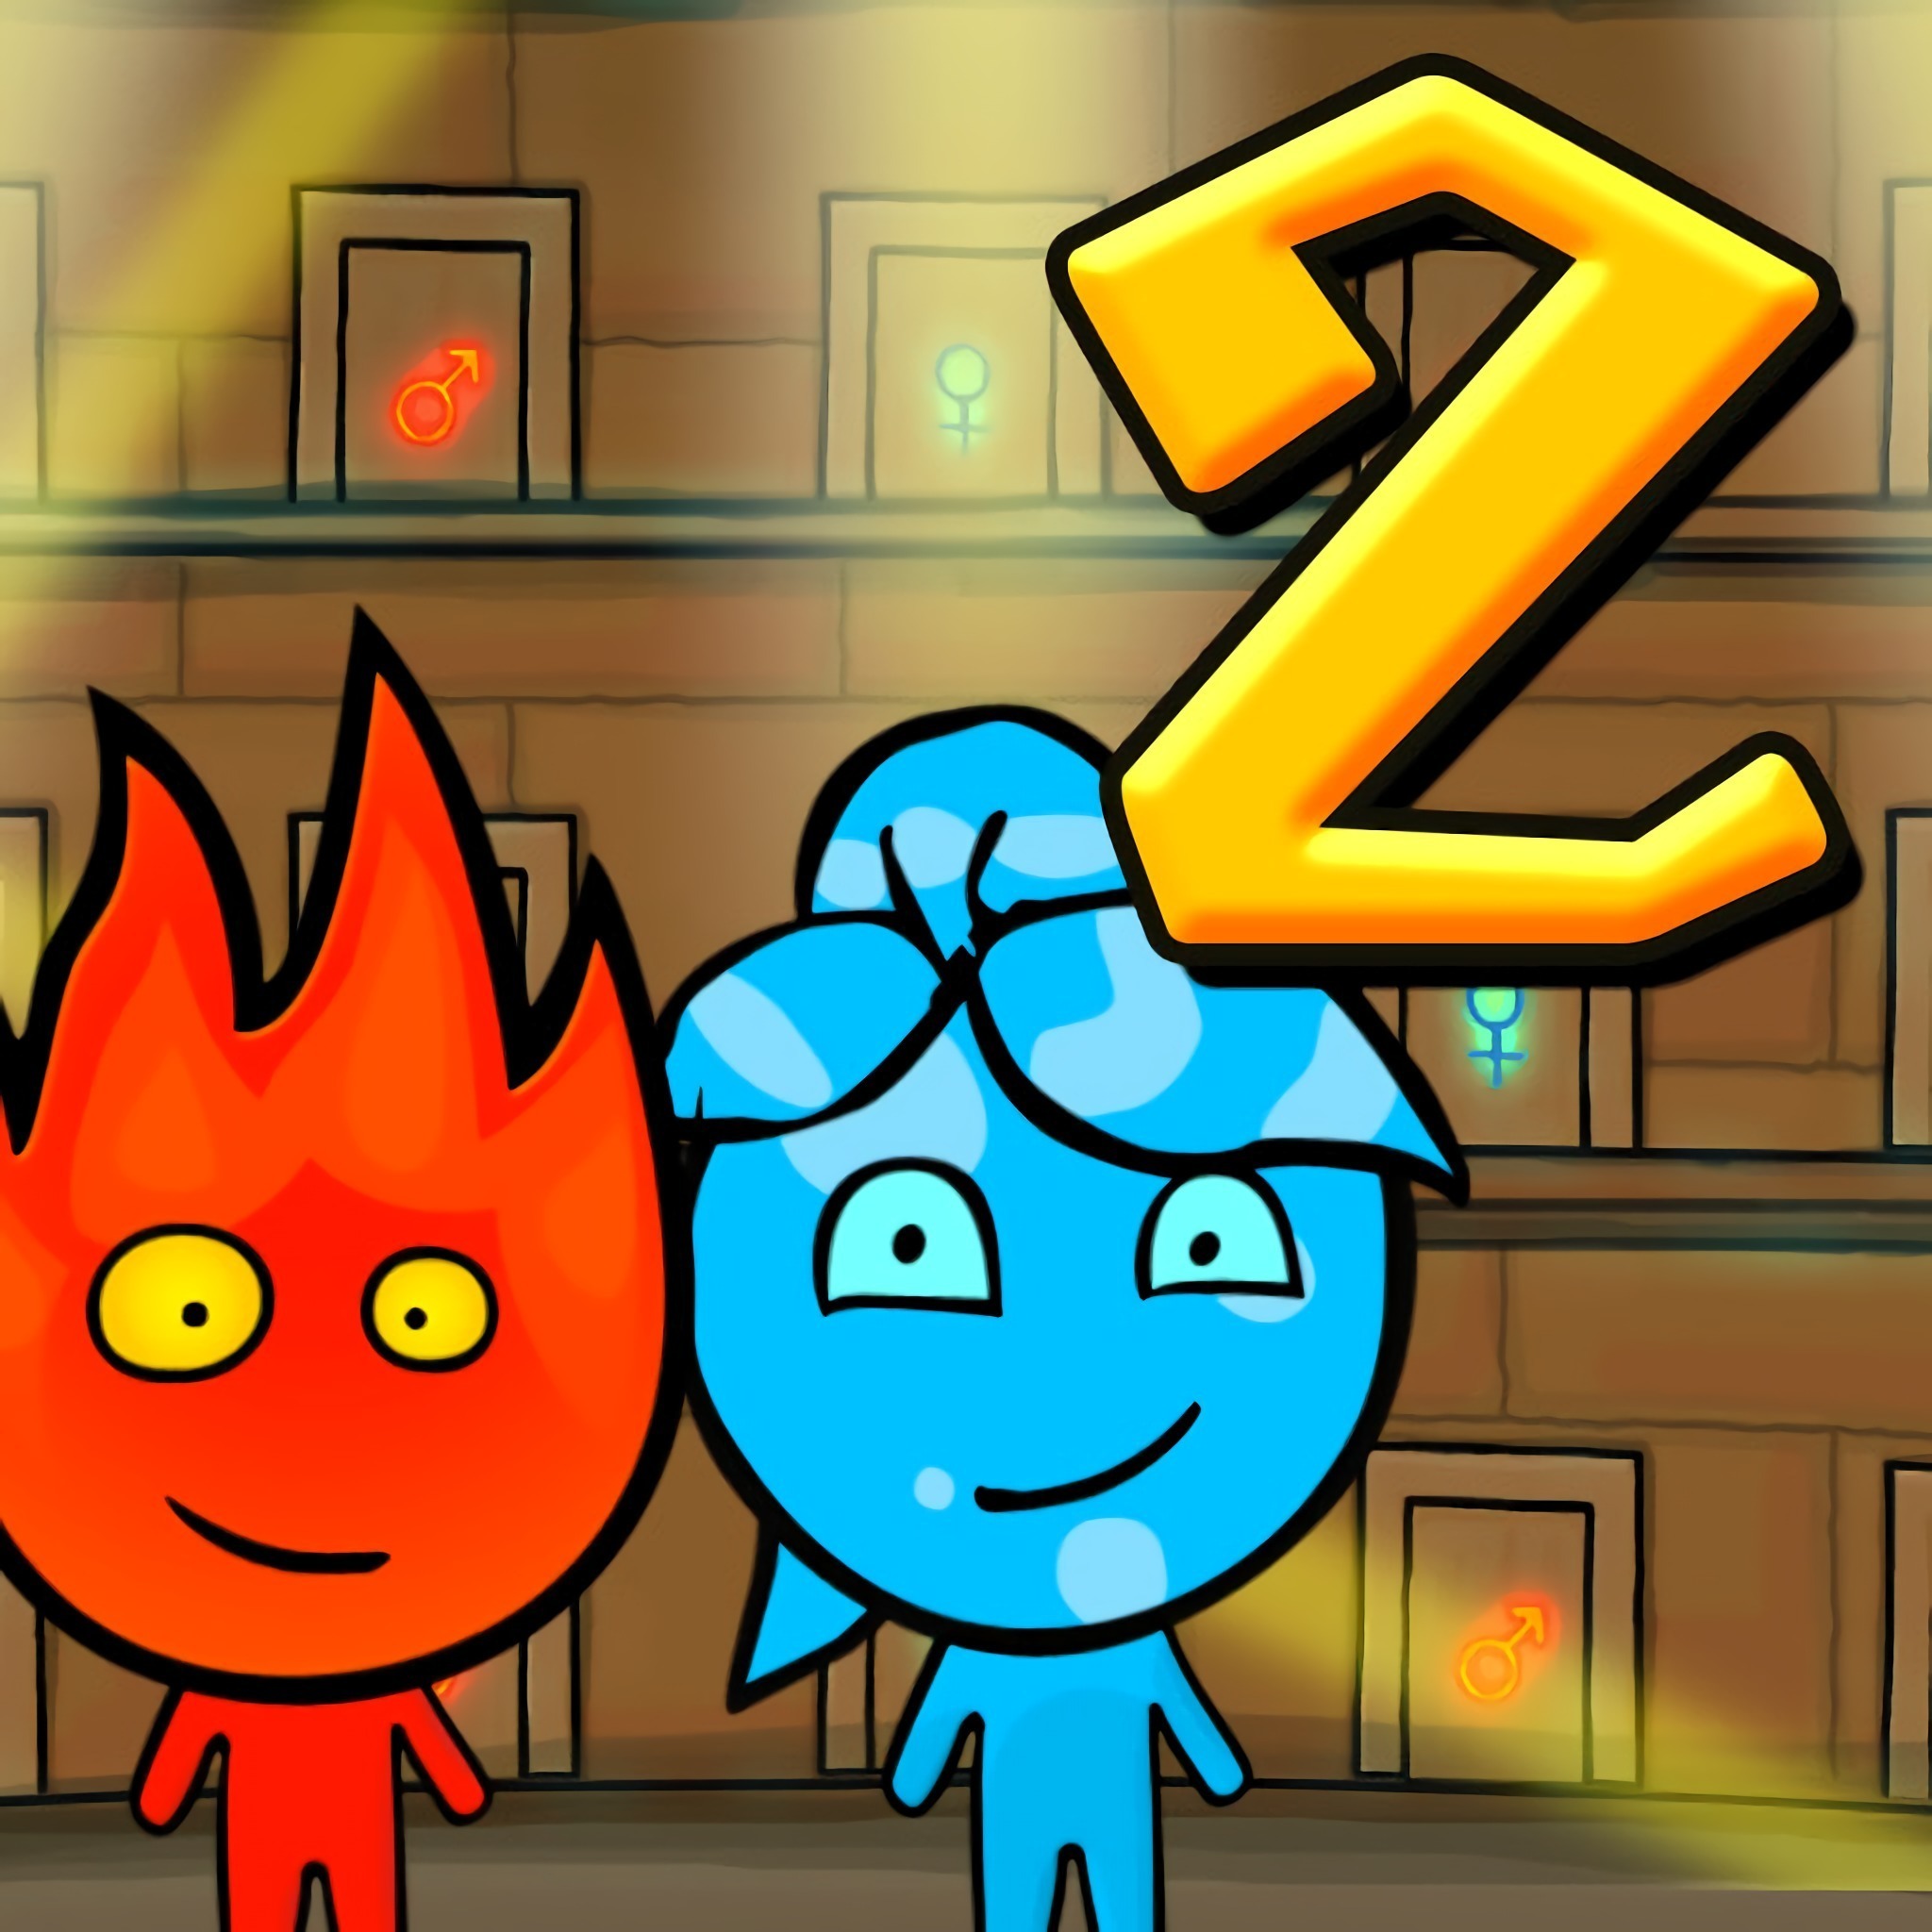 Fireboy And Watergirl 2: Light Temple play at